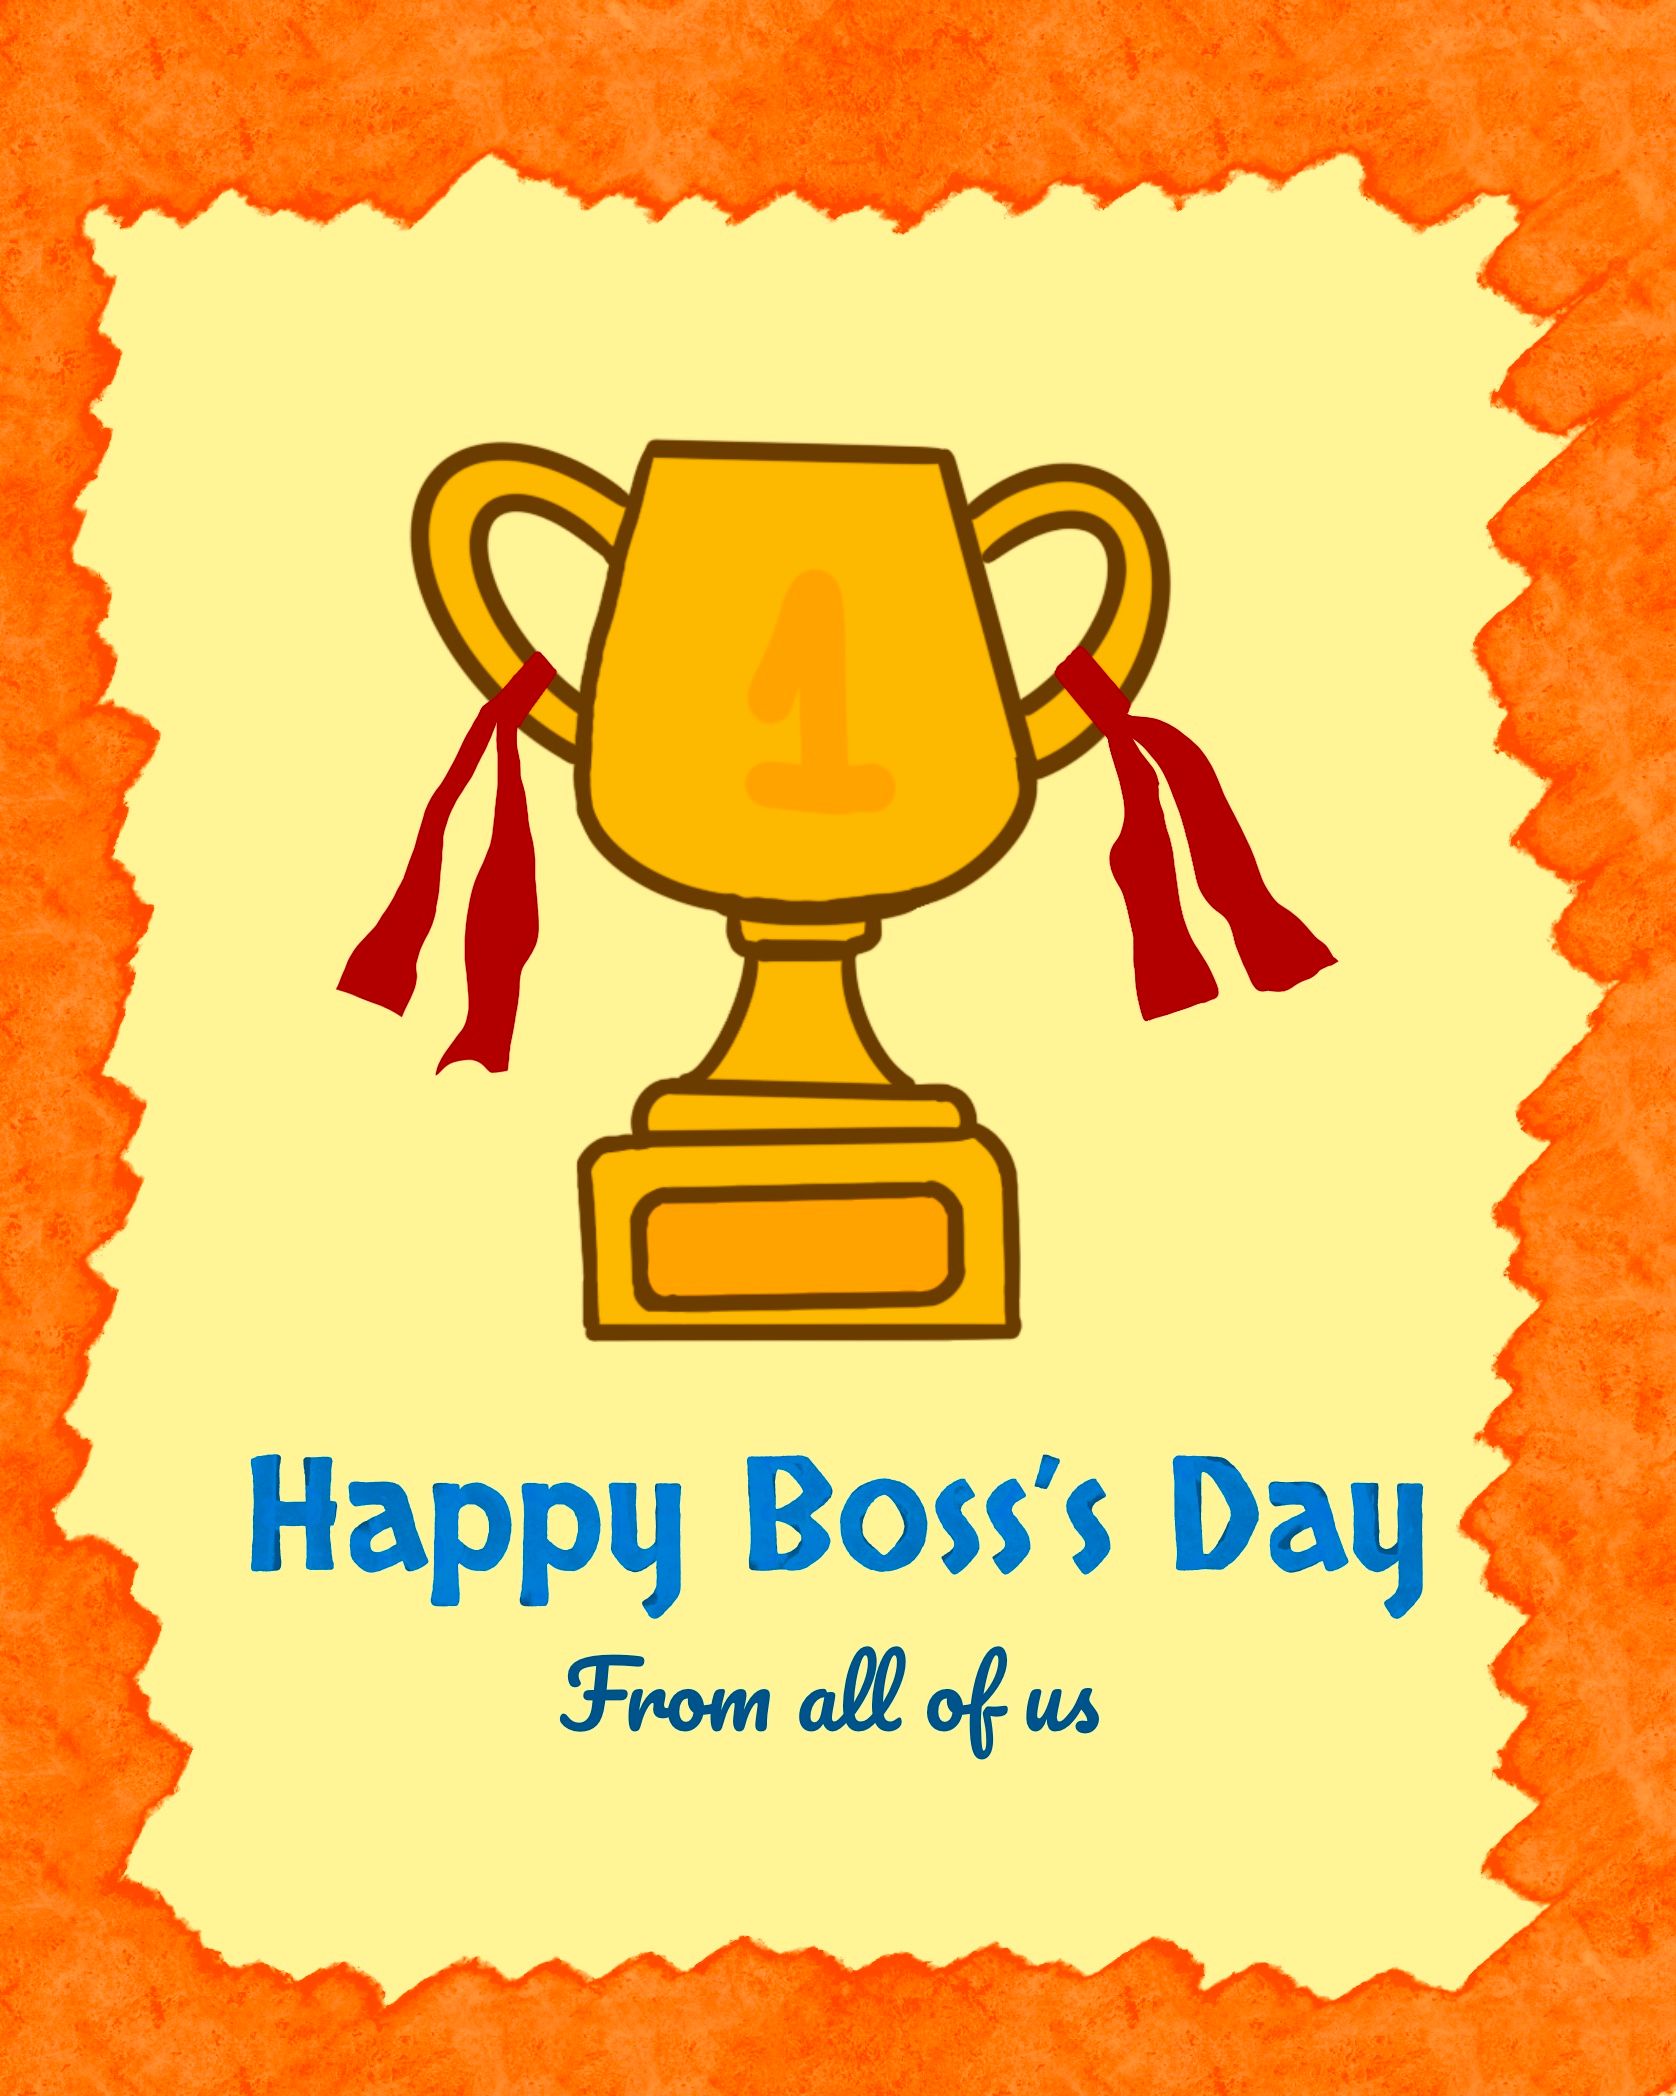 Card design "happy boss day trophy"